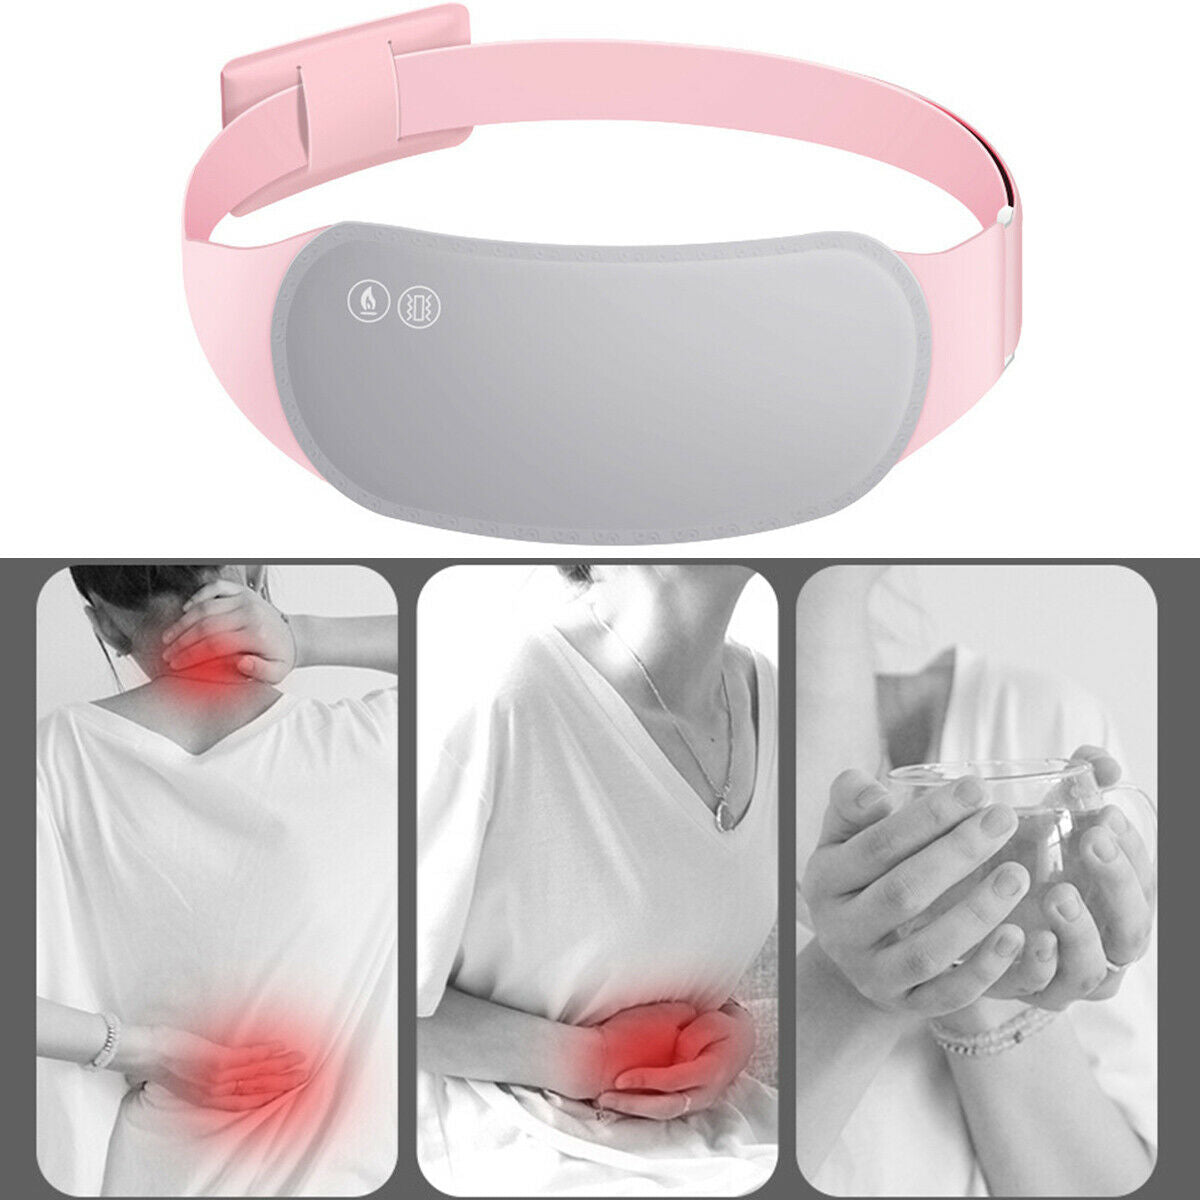 USB Heating Pad Menstrual Cramp Period Pain Relief Therapy Electric Warming Belt